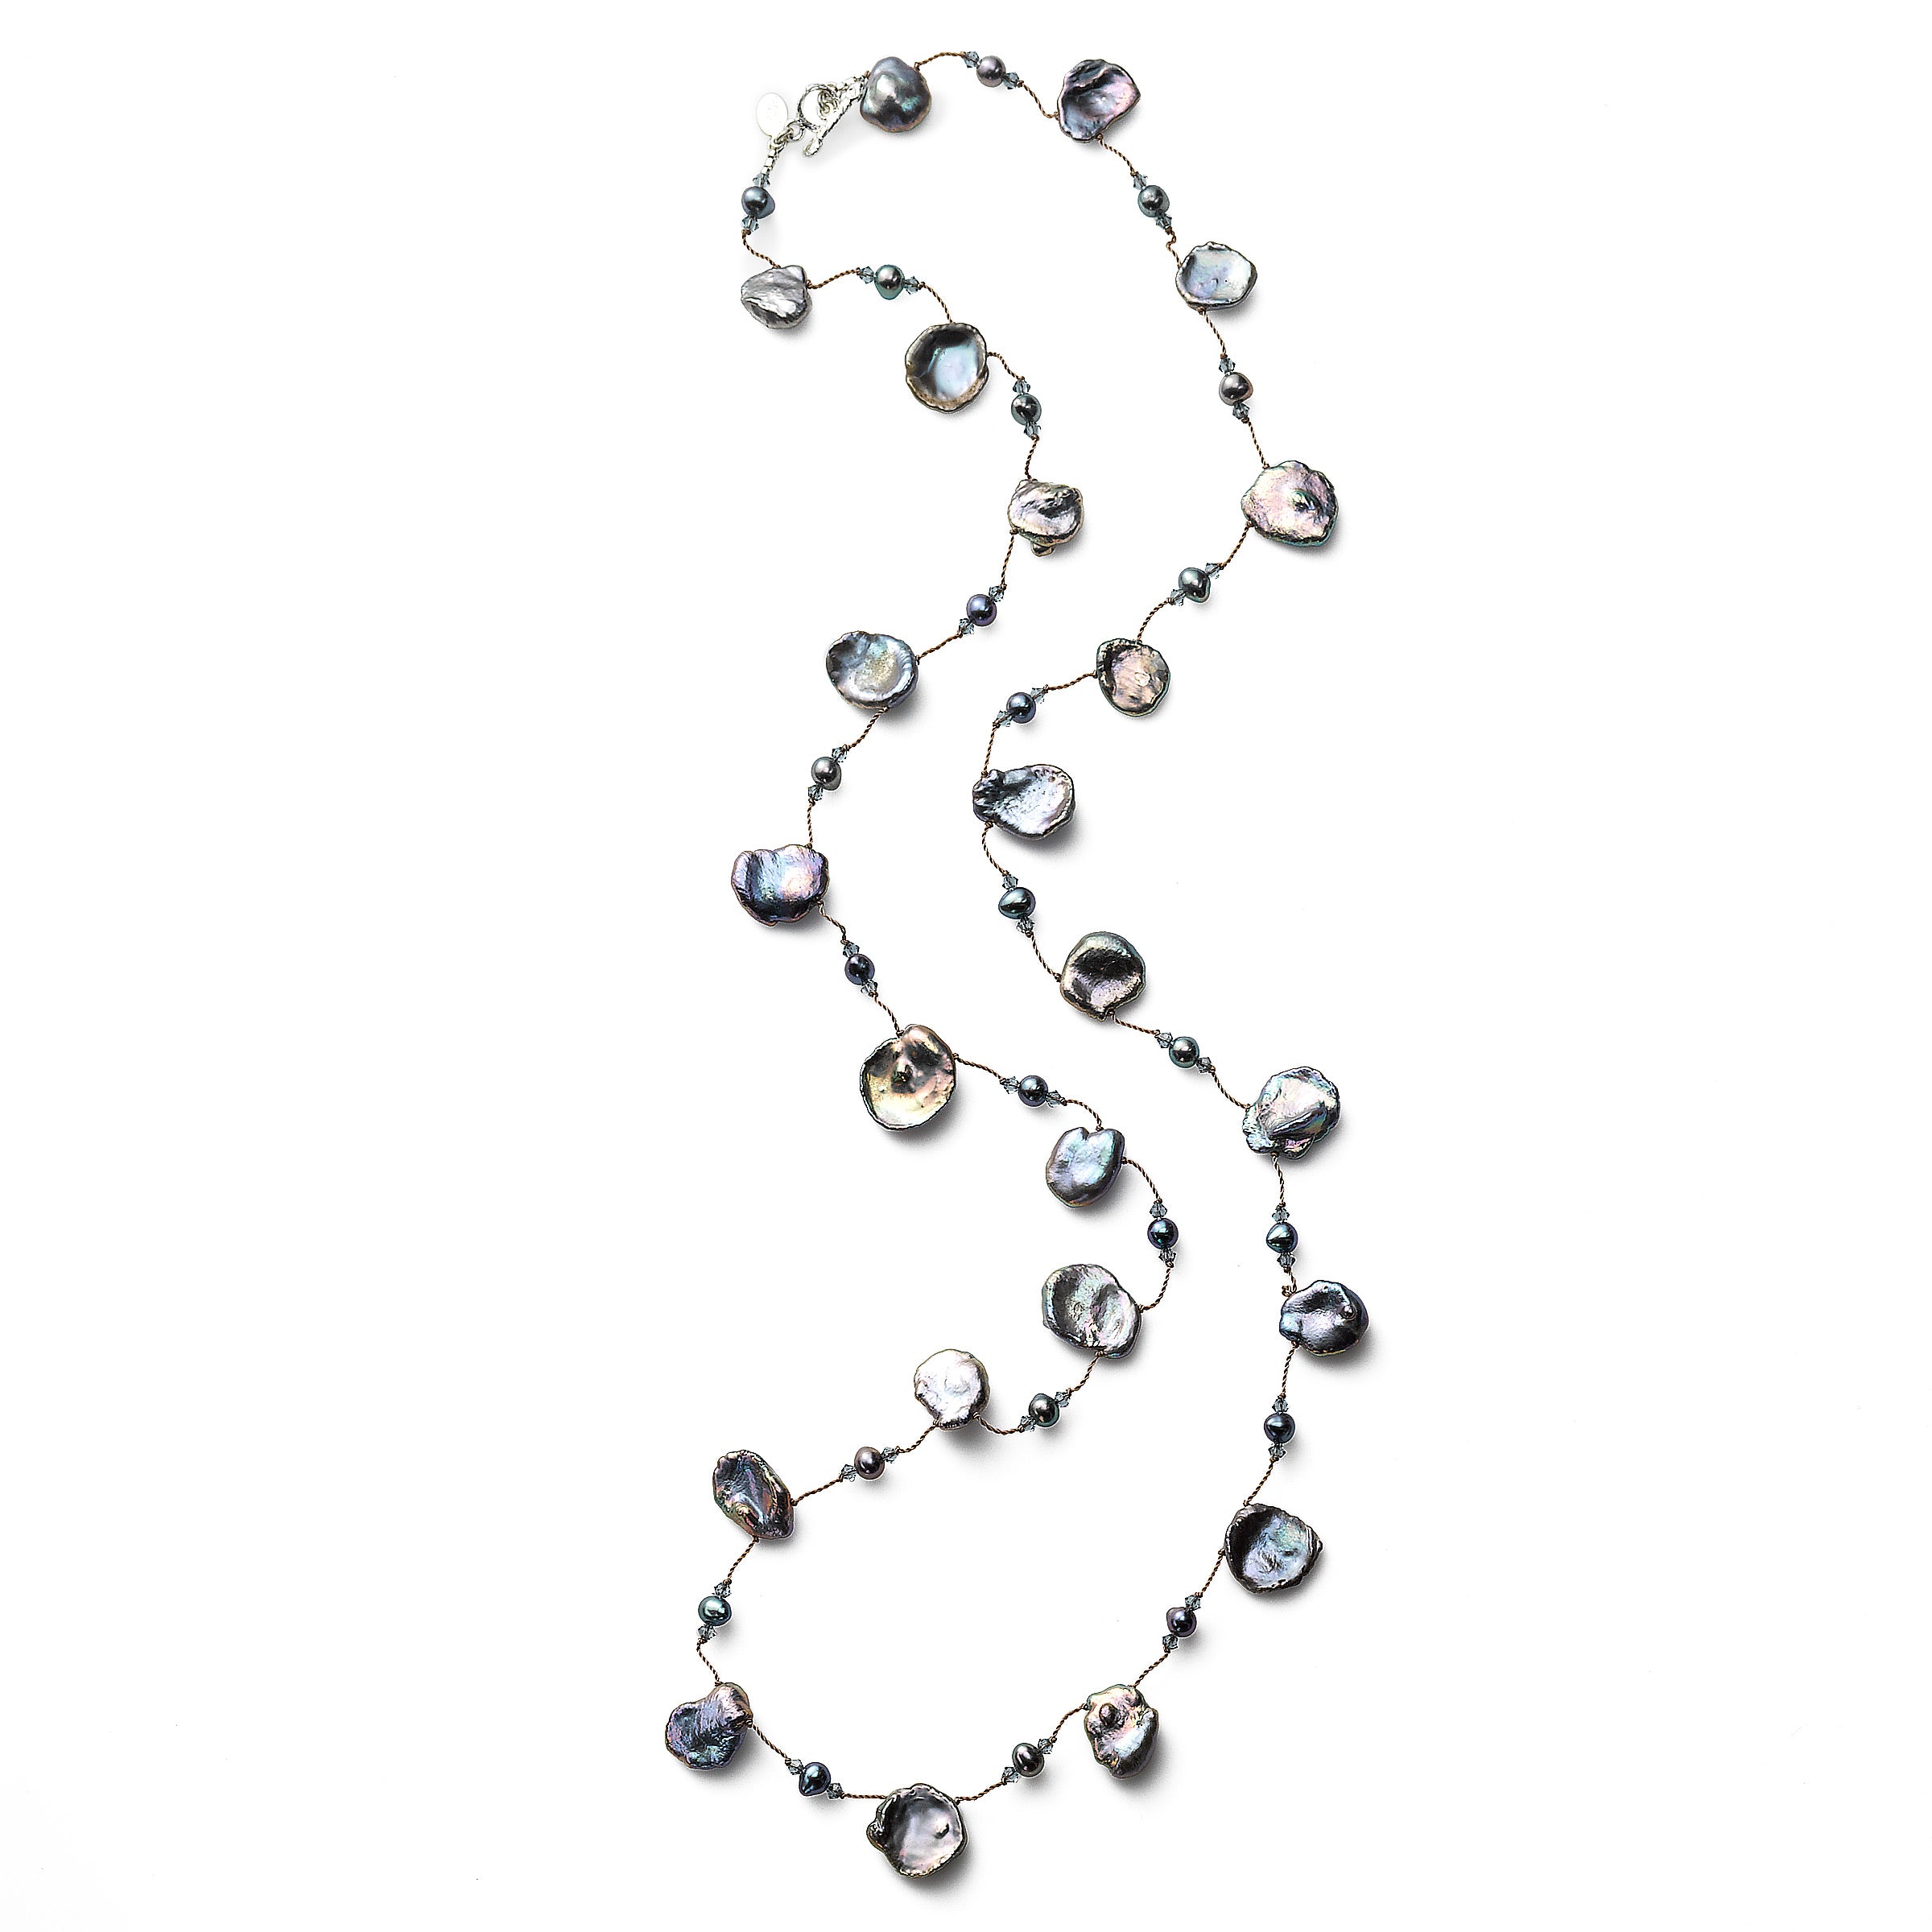 Keshi freshwater cultured pearl necklace